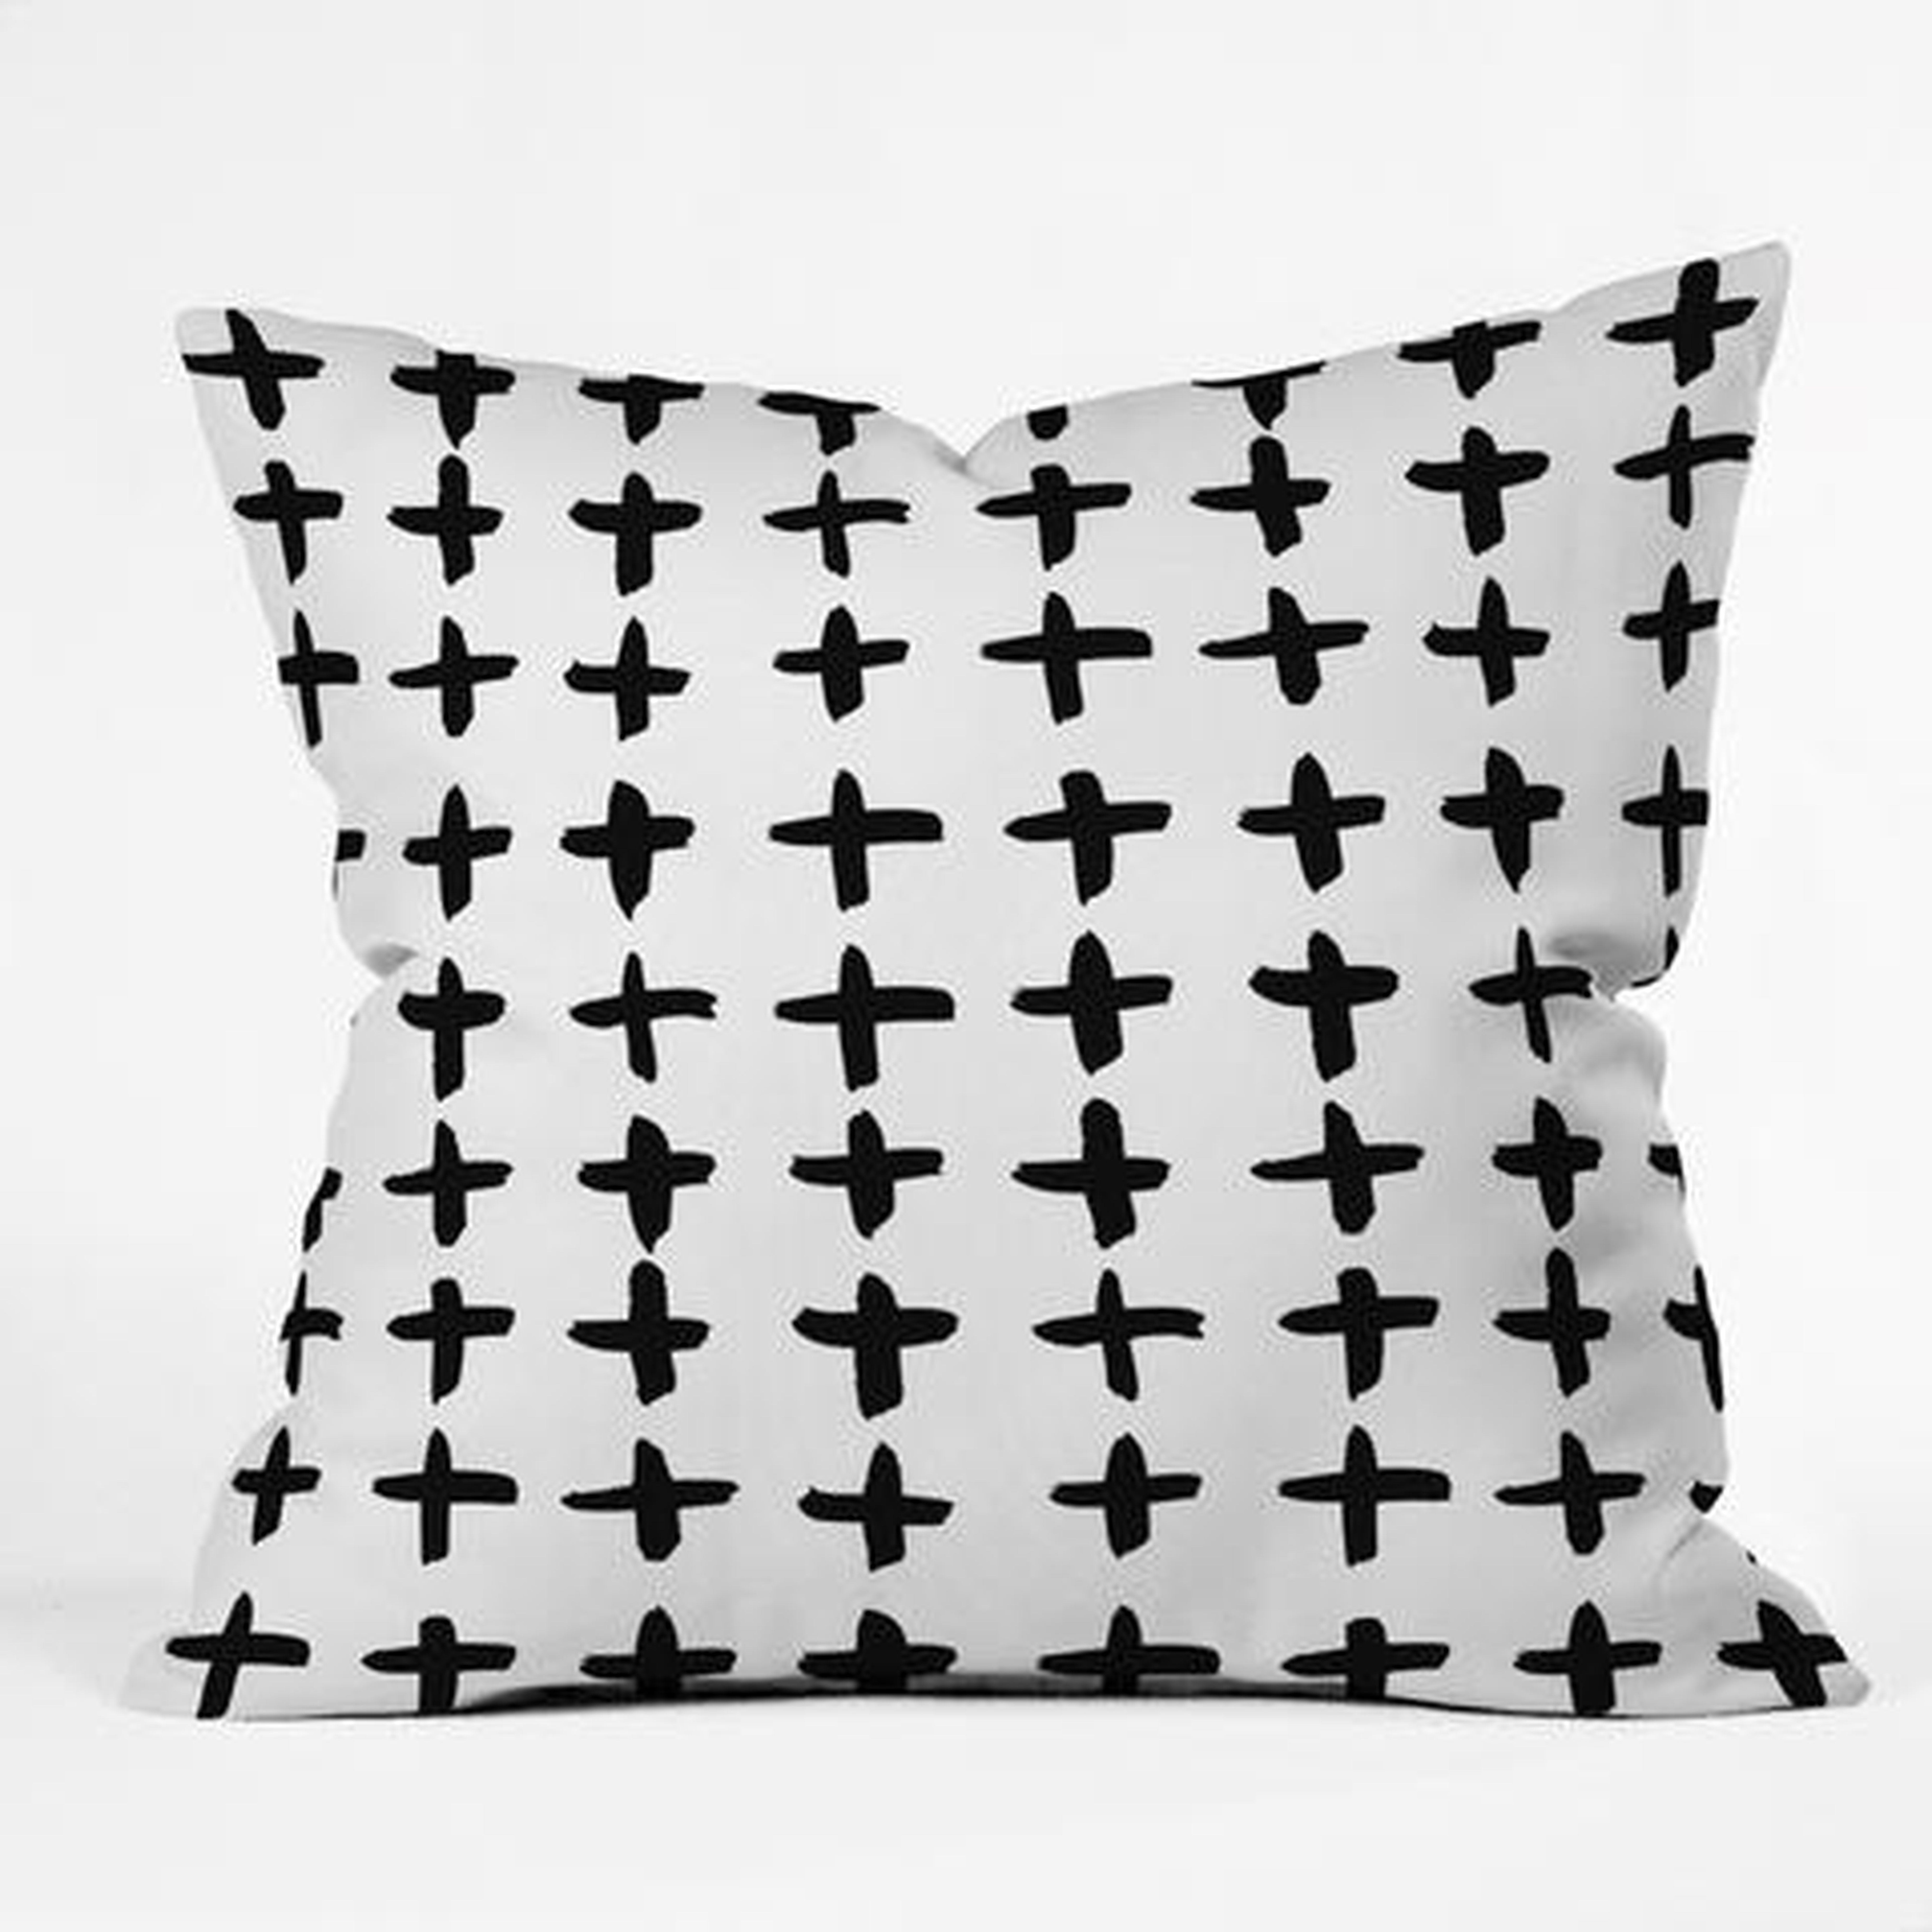 PLUS Outdoor Throw Pillow - 16x16 Polyester Fill - Wander Print Co.